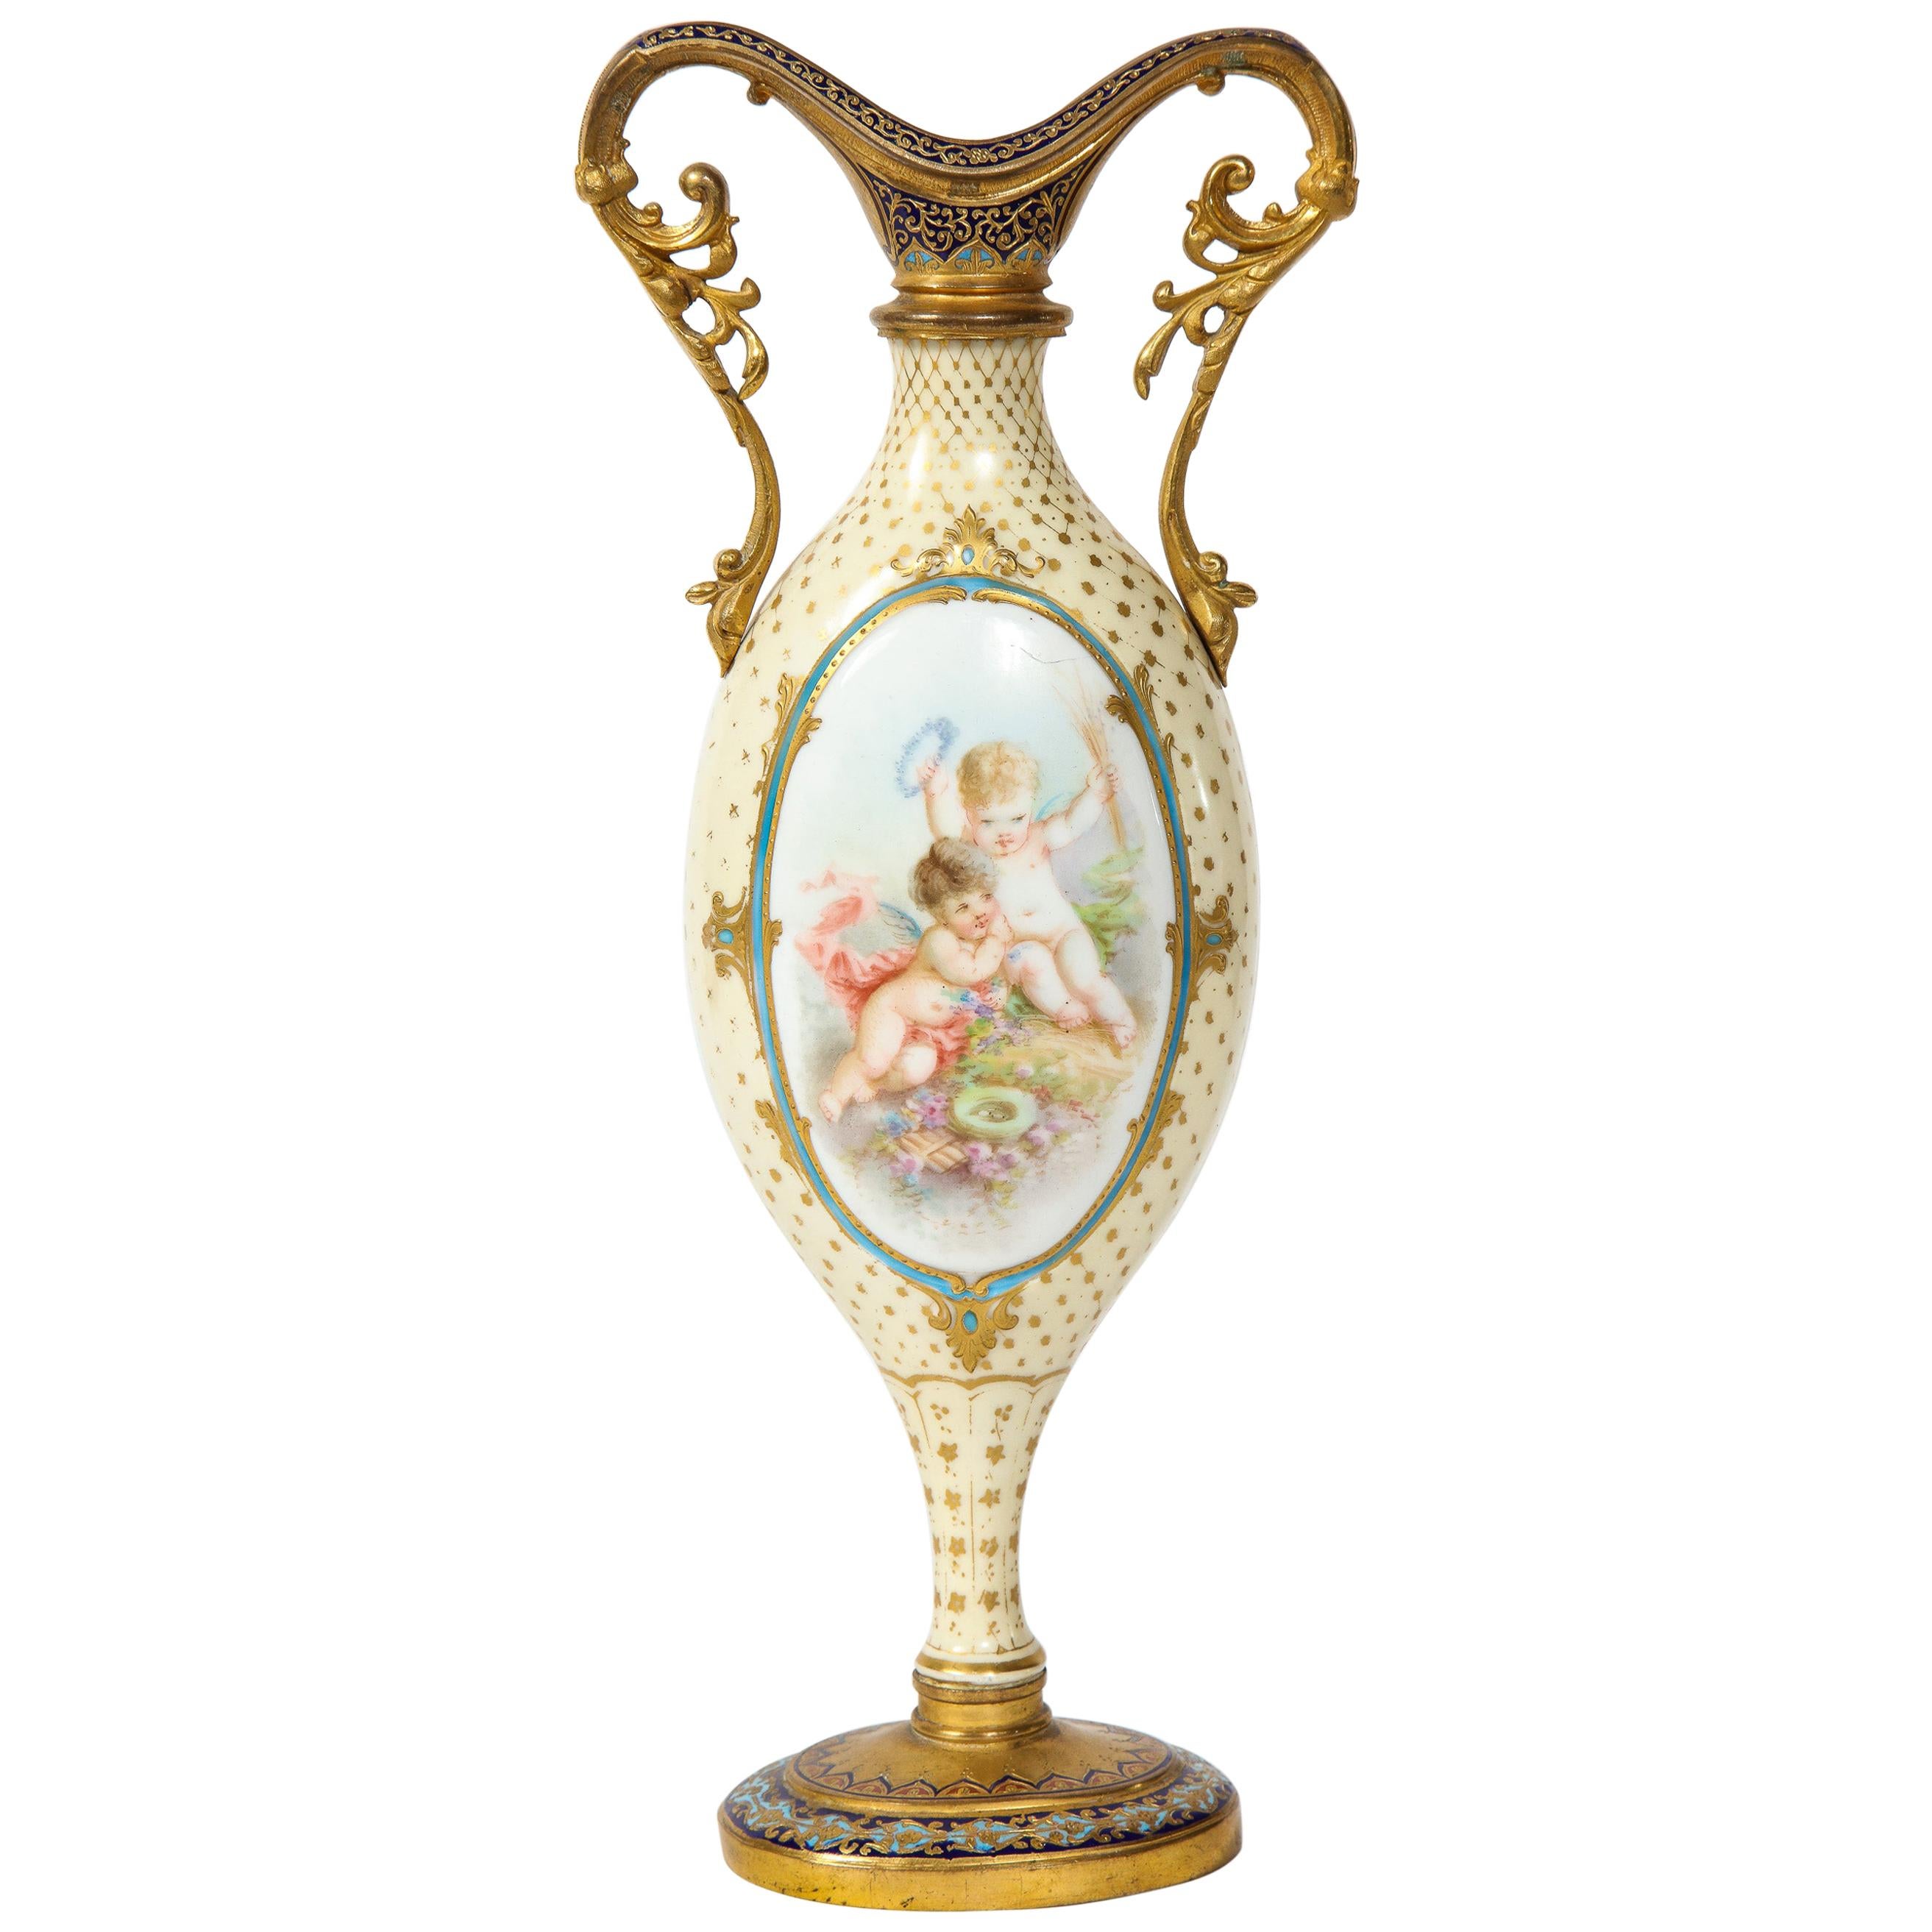 French Ormolu-Mounted White Sevres Porcelain and Champlevé Enamel Vase